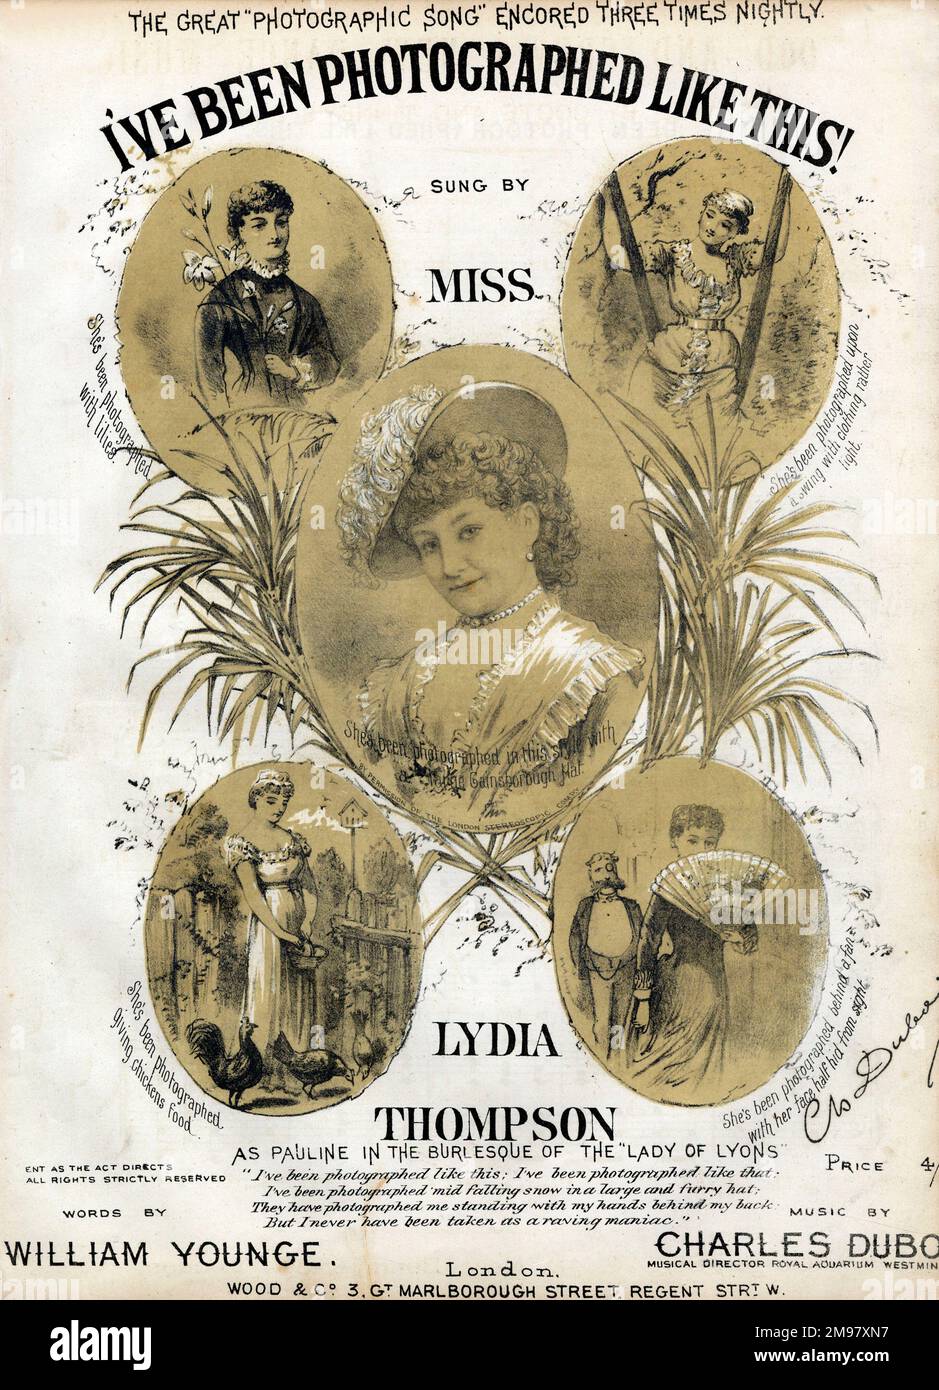 Music cover, I've Been Photographed Like This!  Sung by Lydia Thompson as Pauline in the burlesque of the Lady of Lyons. Words by William Younge, music by Charles Dubois. The song was a satire on the craze for artistic photography in various poses. Stock Photo